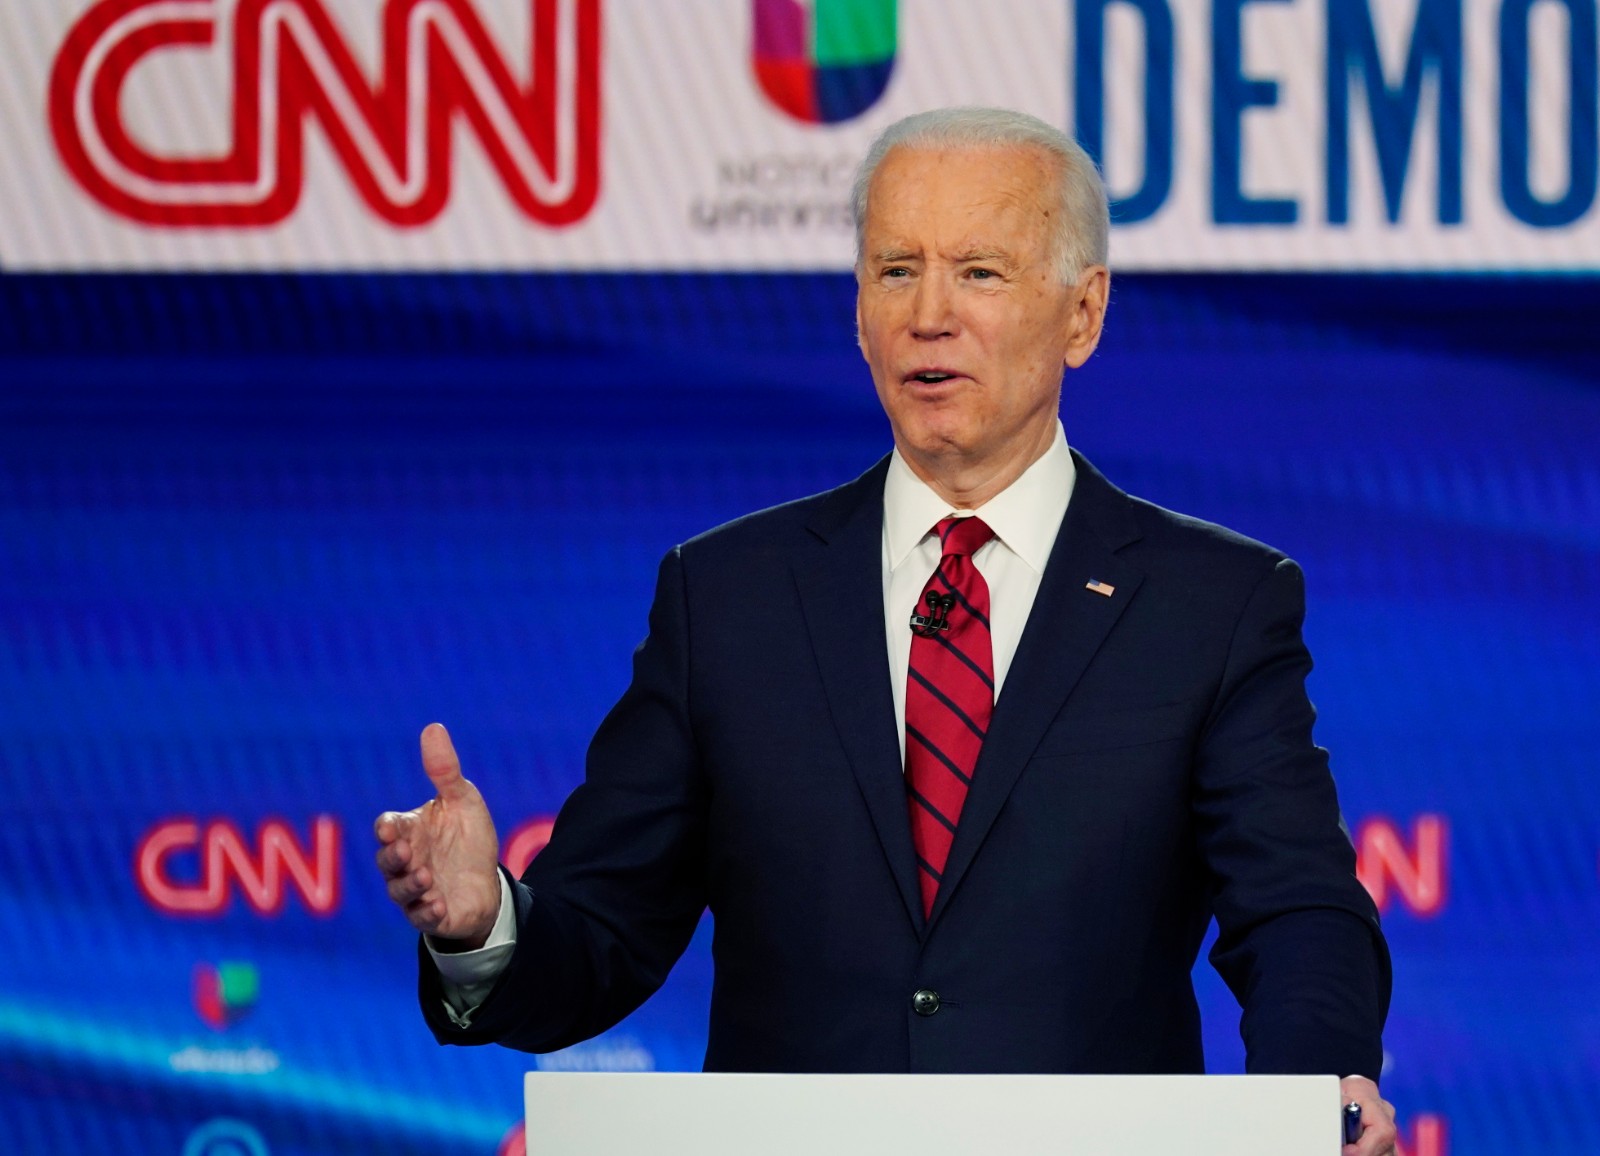 In this Sunday, March 15, 2020, photo, former Vice President Joe Biden, with Sen. Bernie Sanders, I-Vt., speaks during a Democratic presidential primary debate at CNN Studios in Washington. What might be the final showdown between the two very different Democratic candidates takes place Tuesday, March 17, 2020, during Florida's presidential primary. (AP Photo/Evan Vucci)